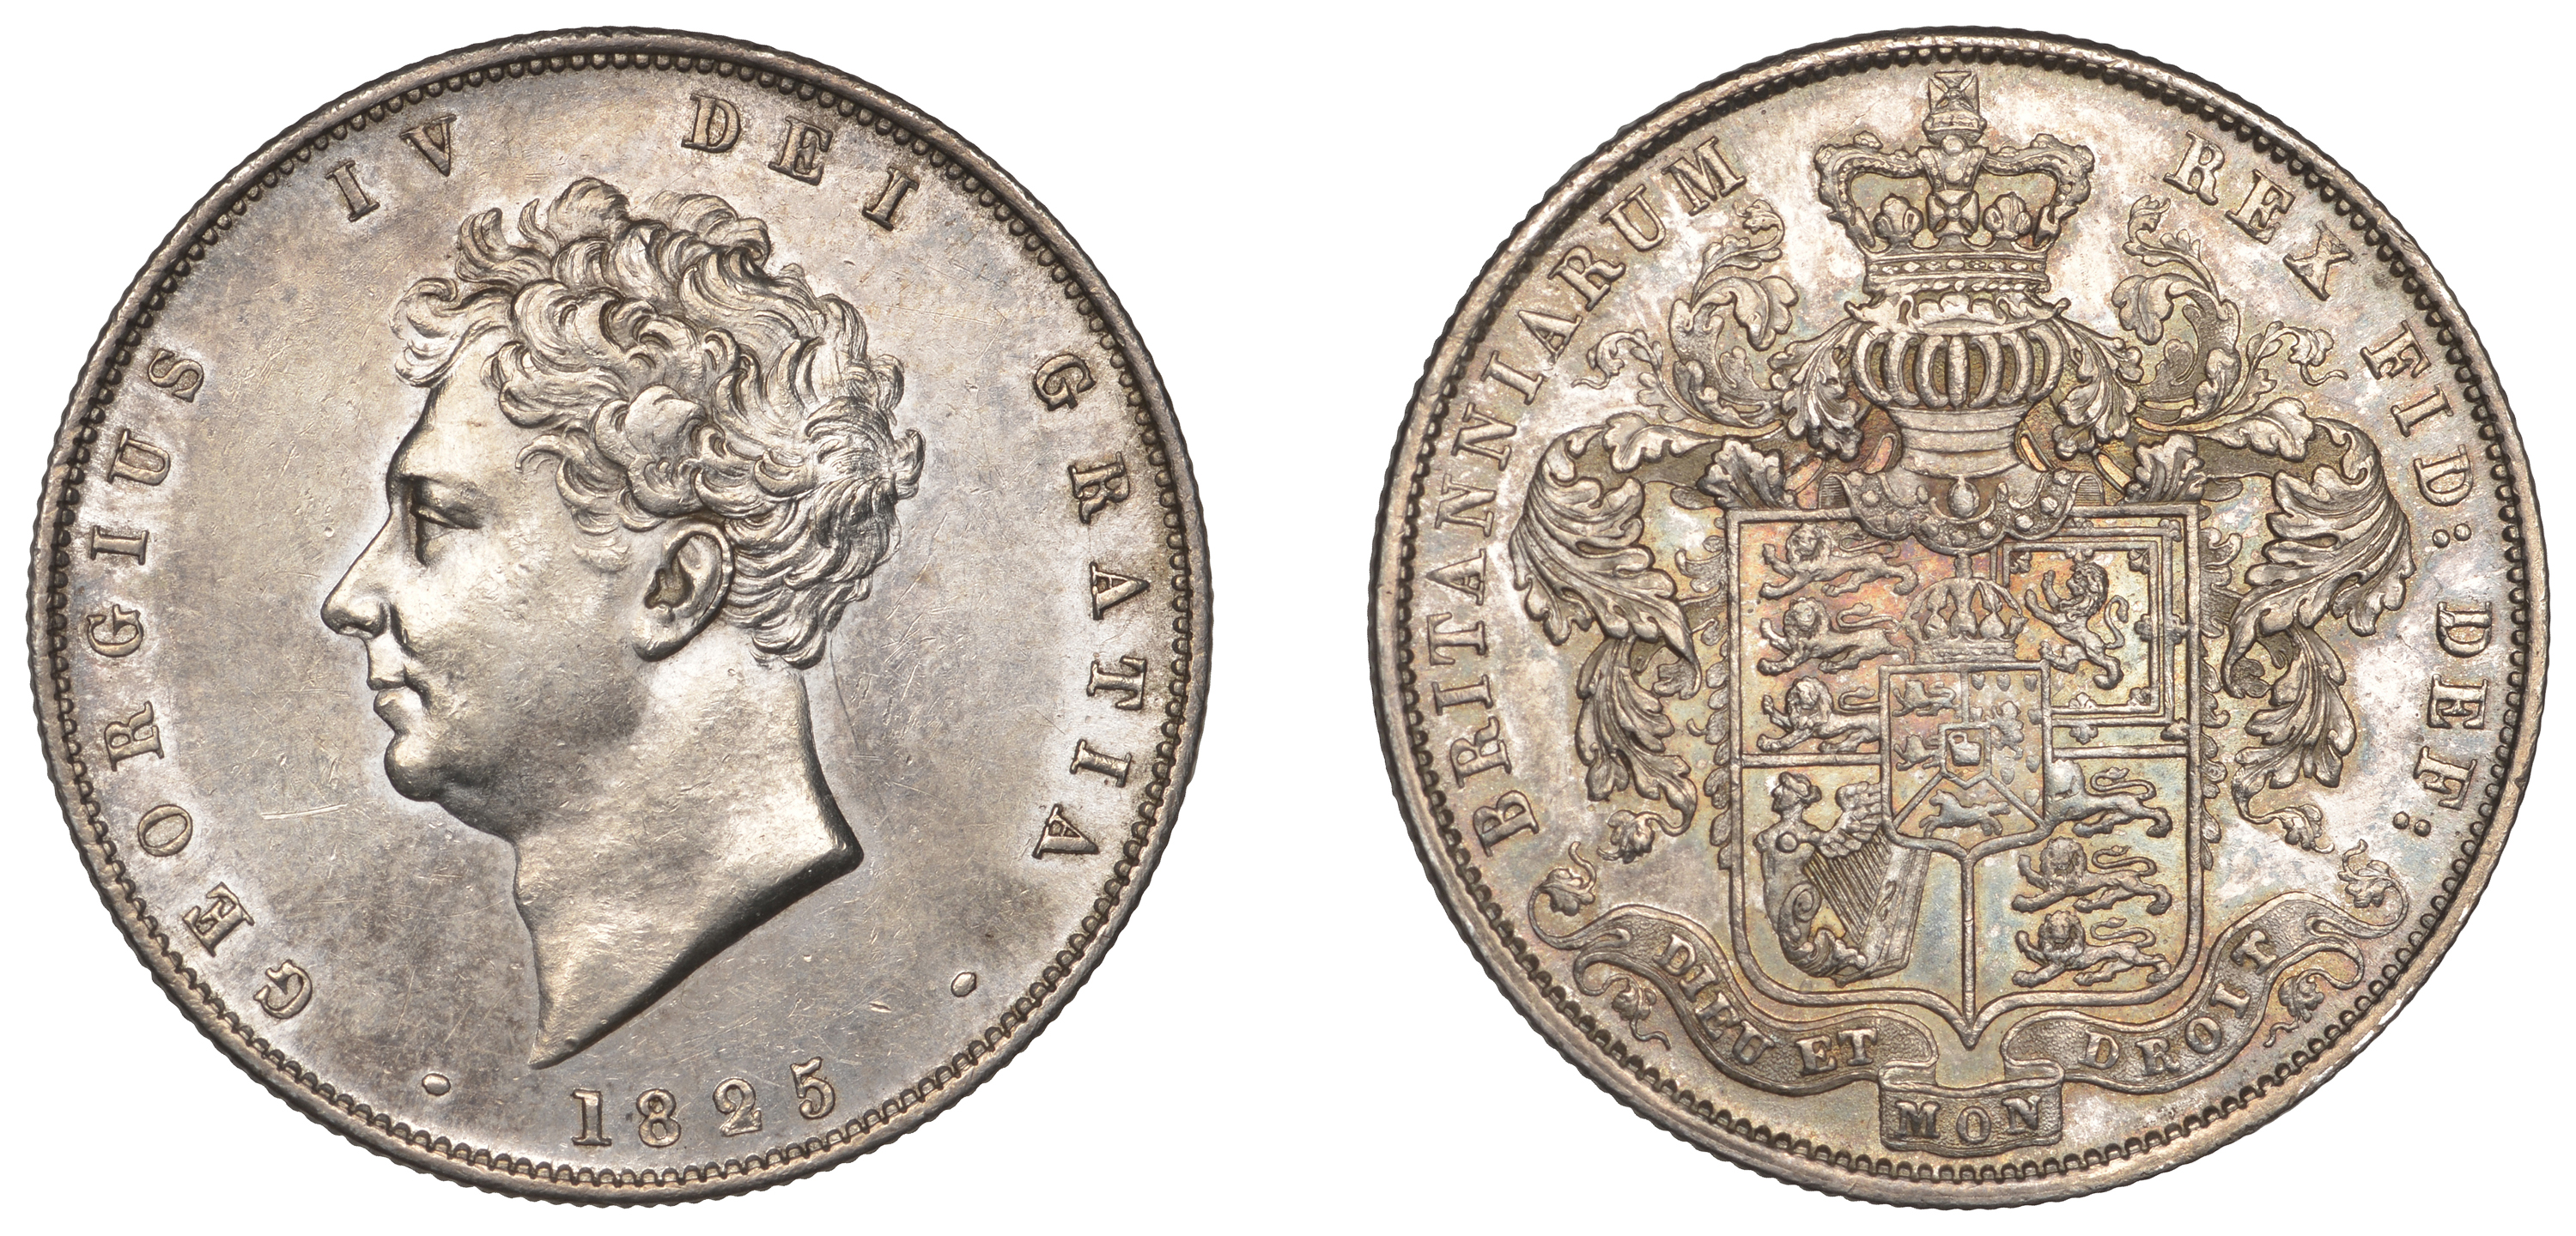 George IV (1820-1830), Halfcrown, 1825 (ESC 2371; S 3809). About extremely fine Â£150-Â£200